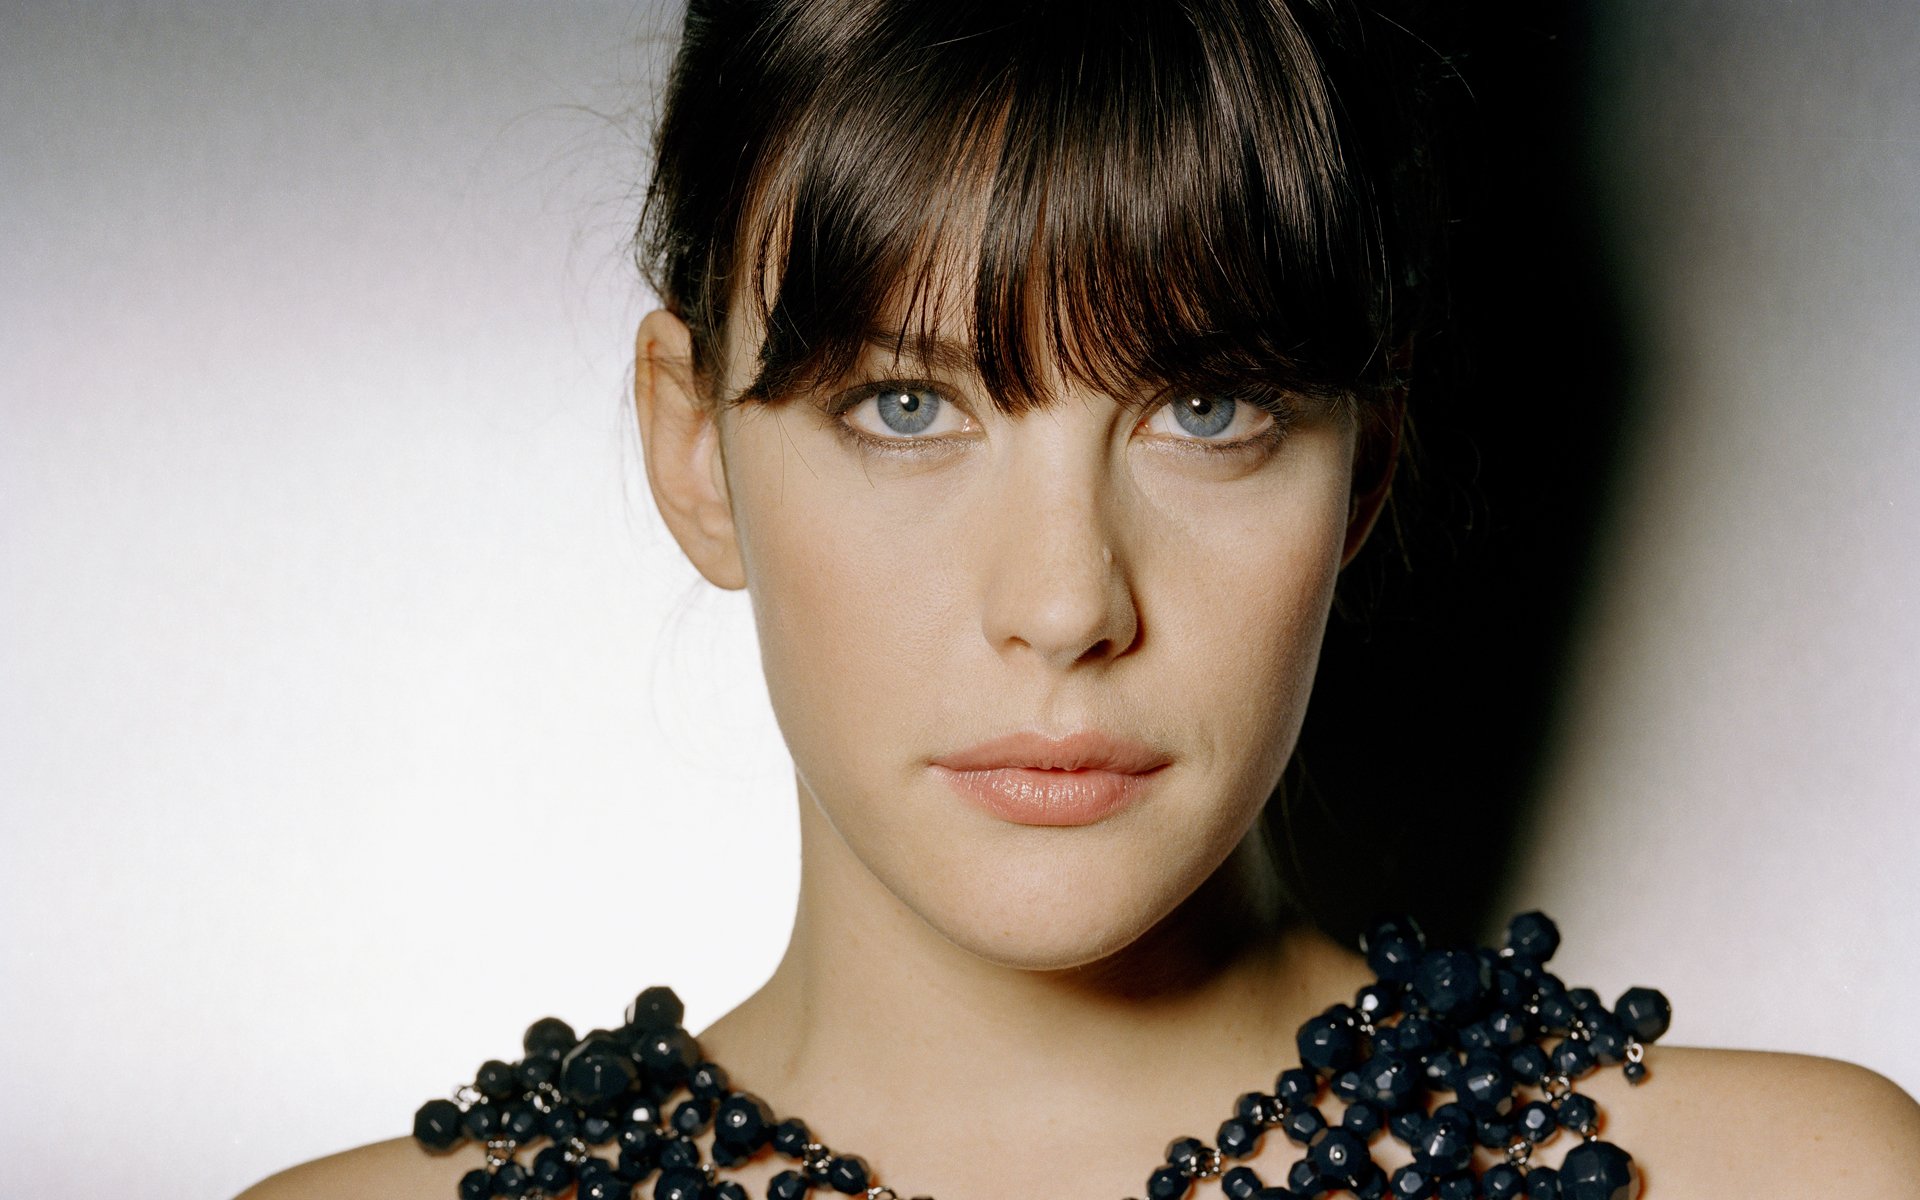 image for PC: Liv Tyler Wallpaper and Image